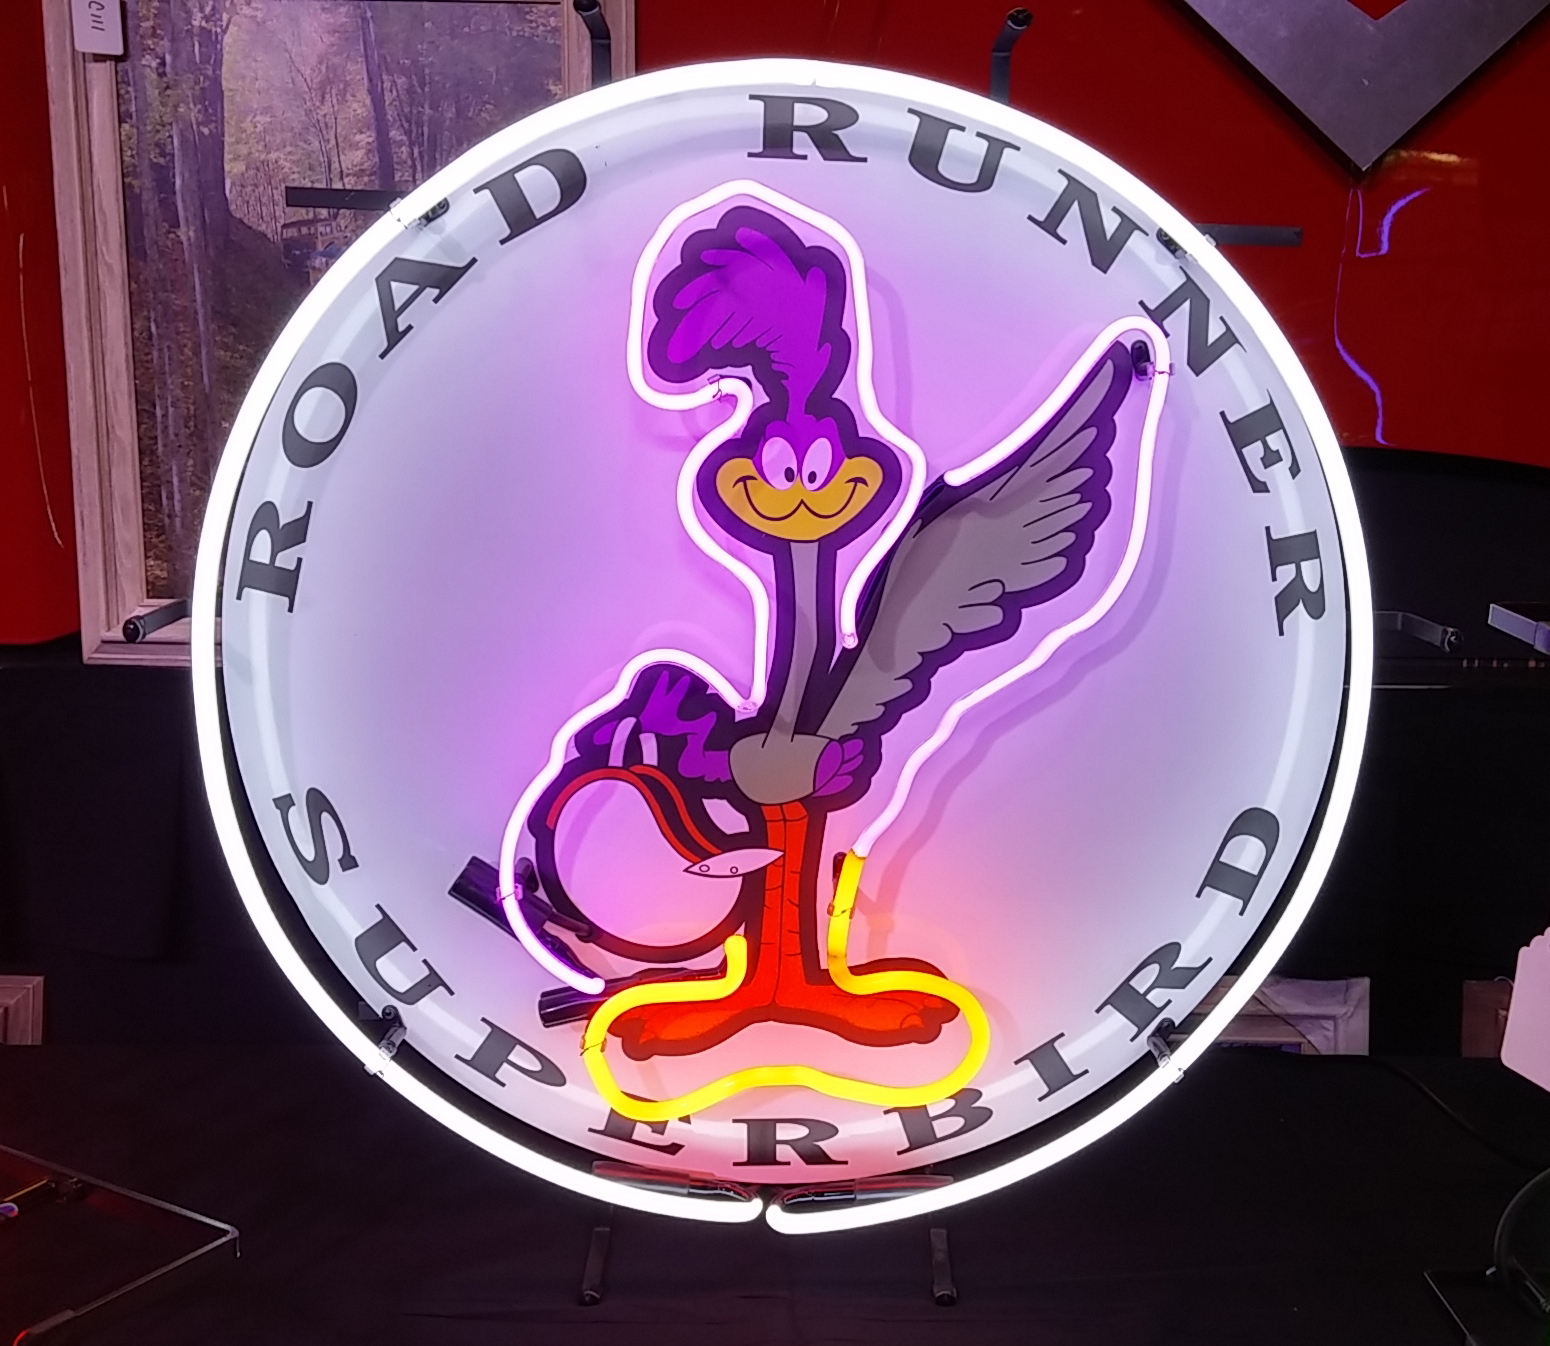 0th Image of a N/A NEON SIGN ROADRUNNER SUPERBIRD